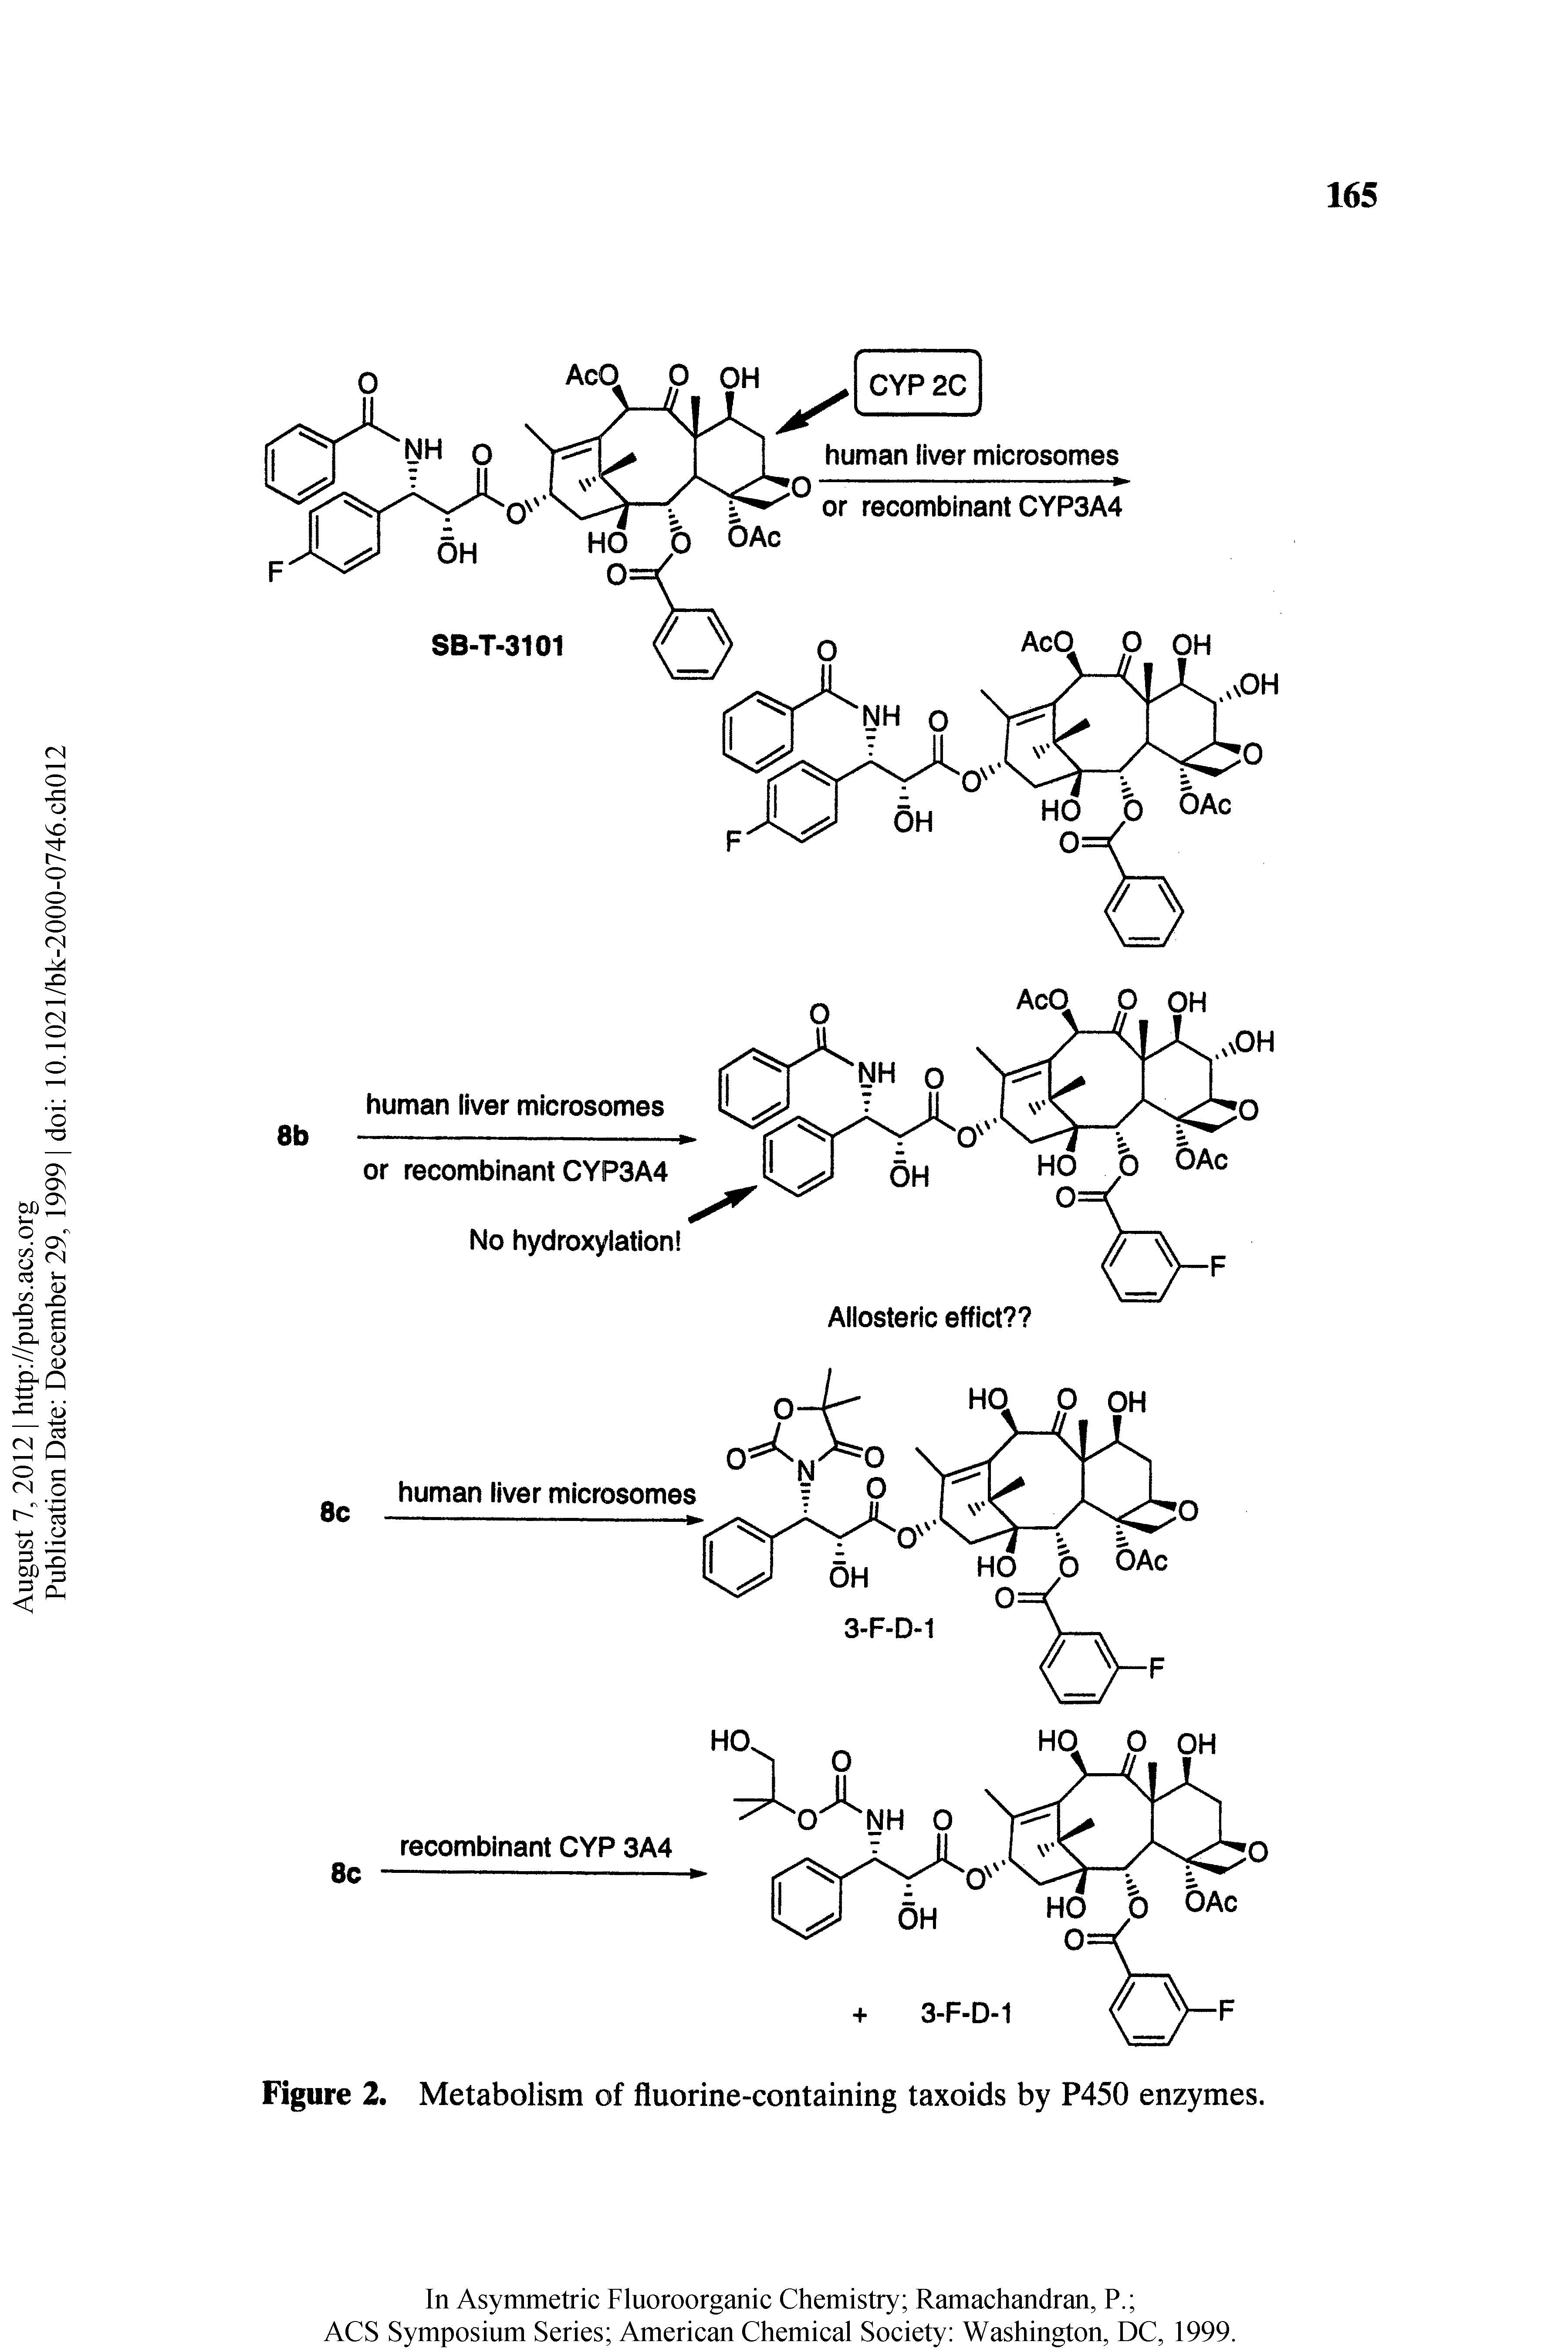 Figure 2. Metabolism of fluorine-containing taxoids by P450 enzymes.